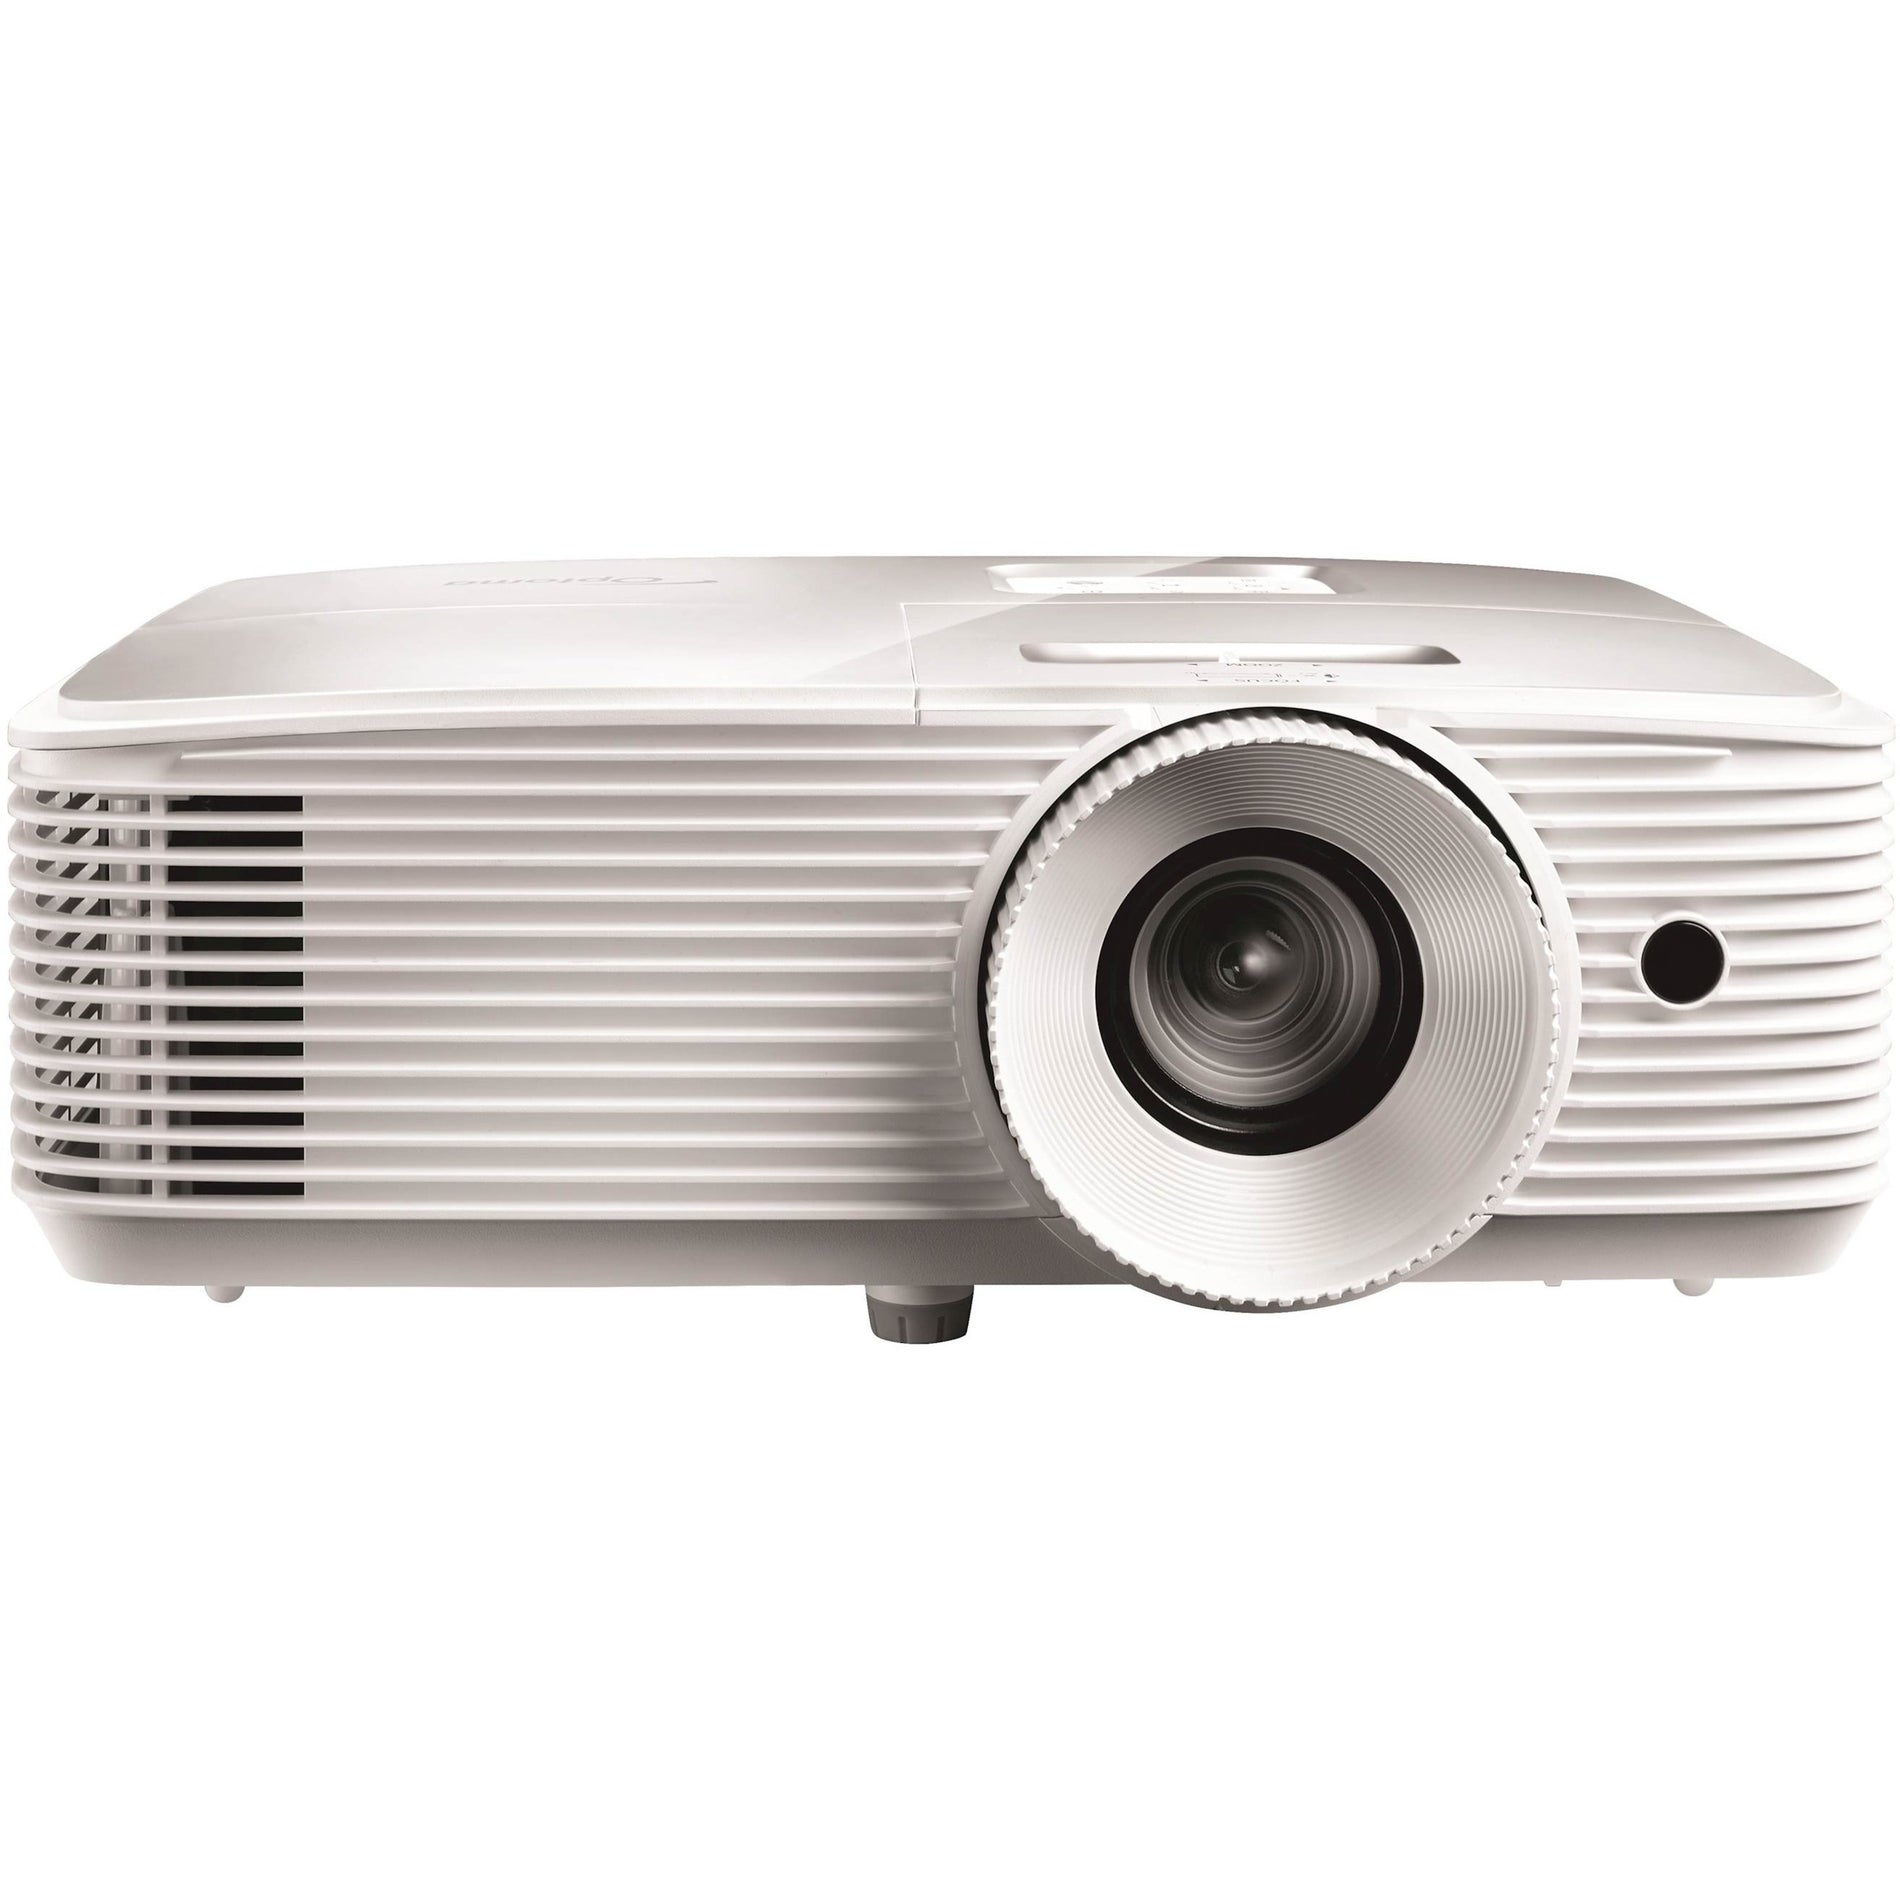 Optoma EH412X DLP Projector, Full HD, 4500 lm, 22,000:1 Contrast Ratio, Portable